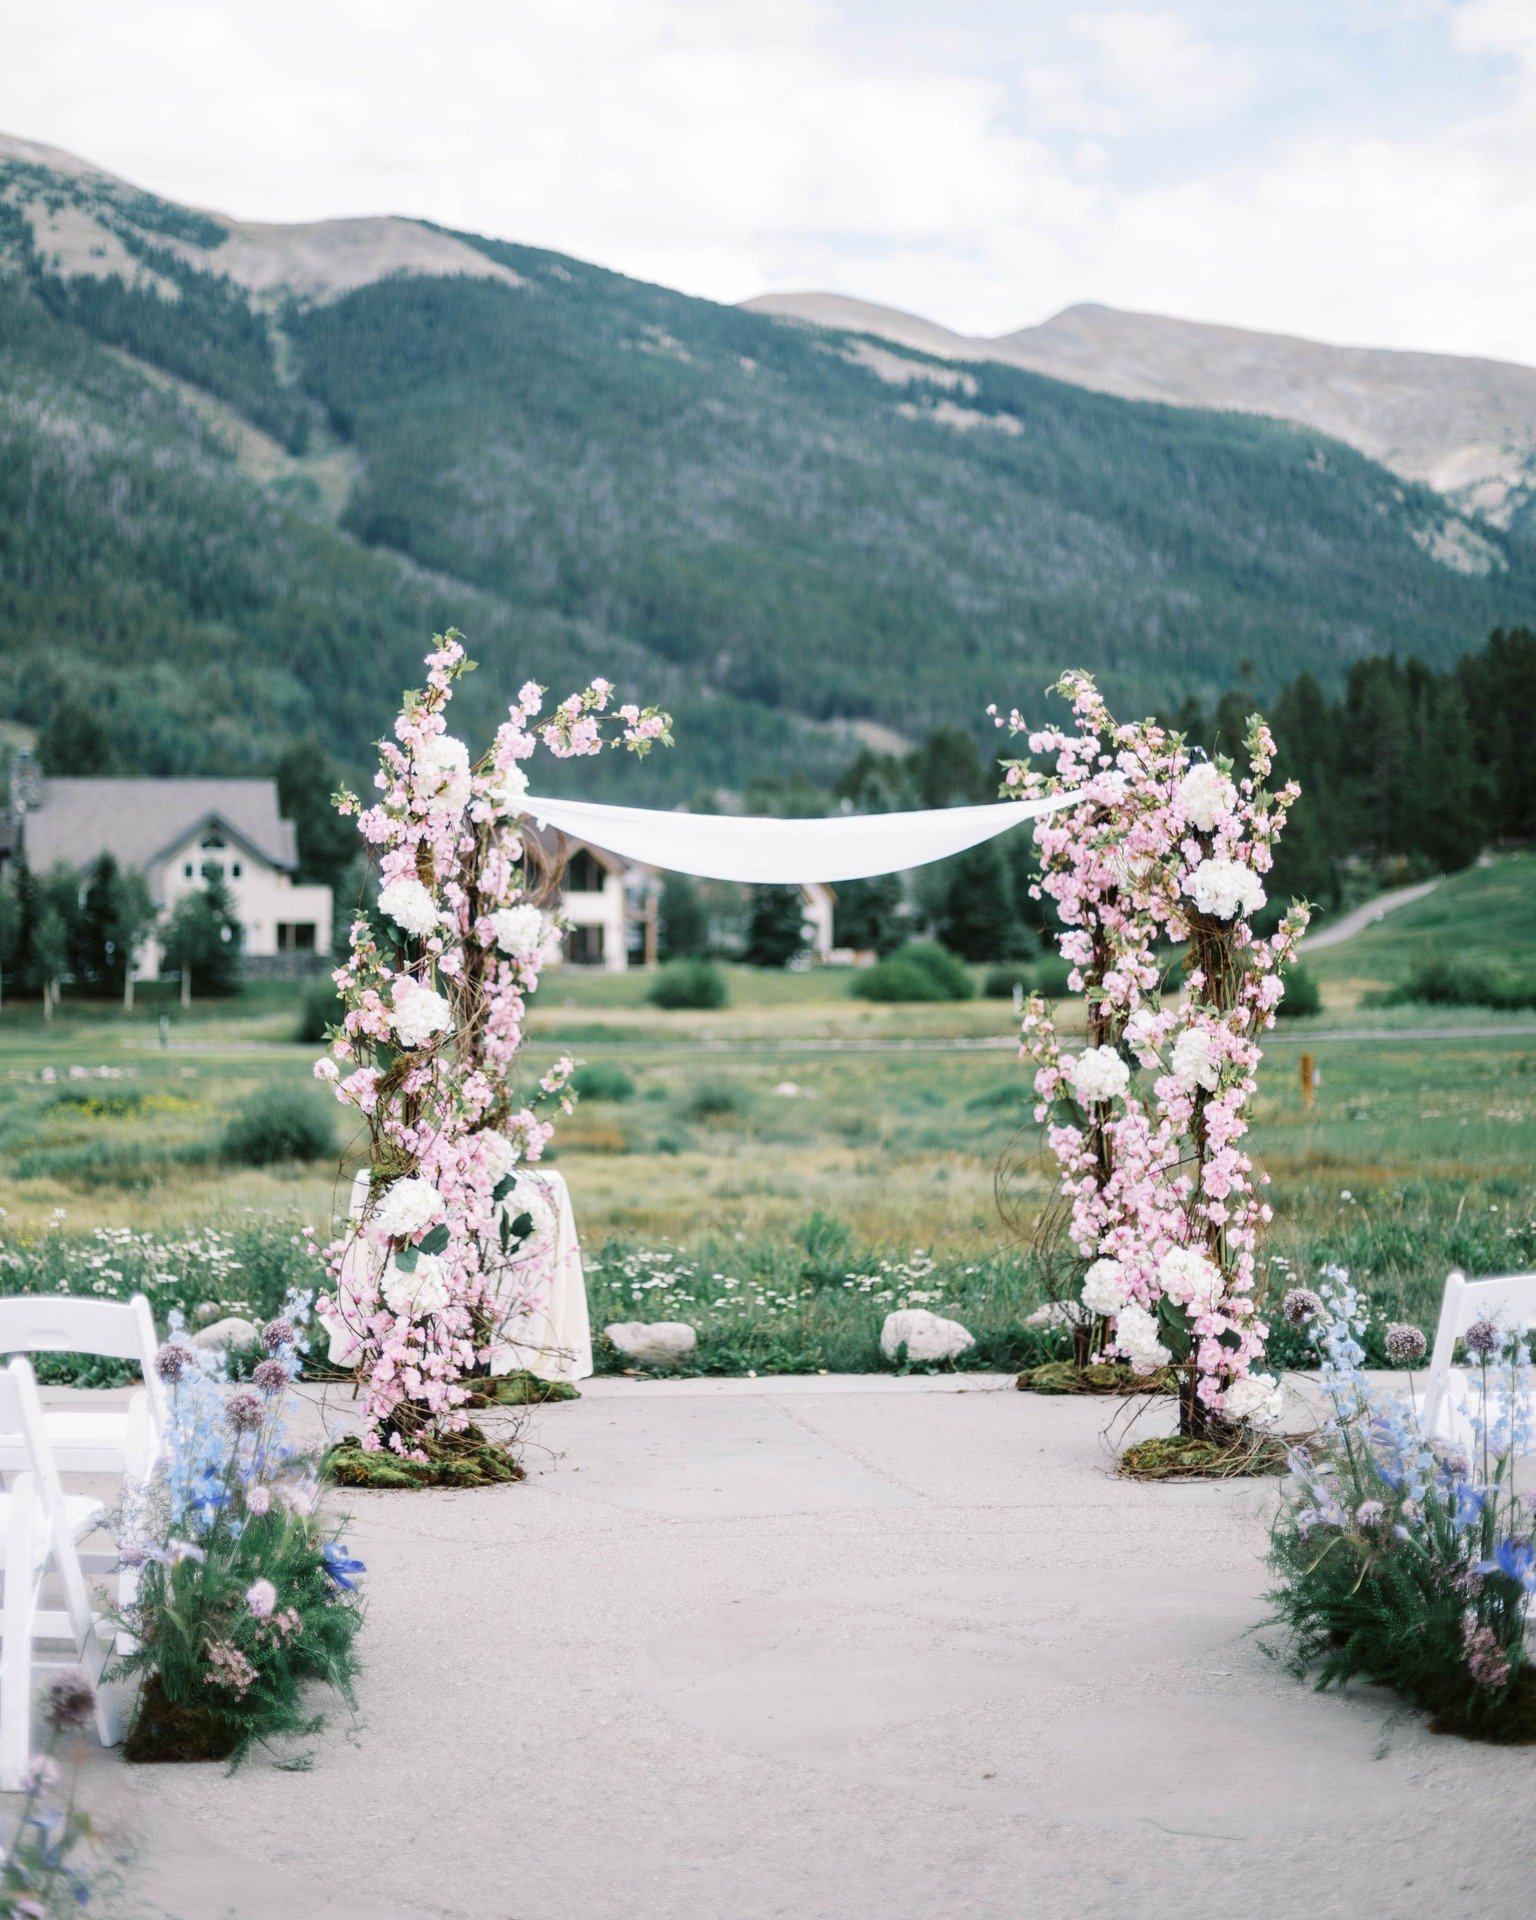 Under the sacred canopy of the Chuppah embark on a journey of love, faith, and unity. 🌿 In this timeless moment, they honor the past, celebrate the present, and embrace the future as one. ❤️

Location 📍 @coppermtn
Planner ✨ @distinctivemountaineven